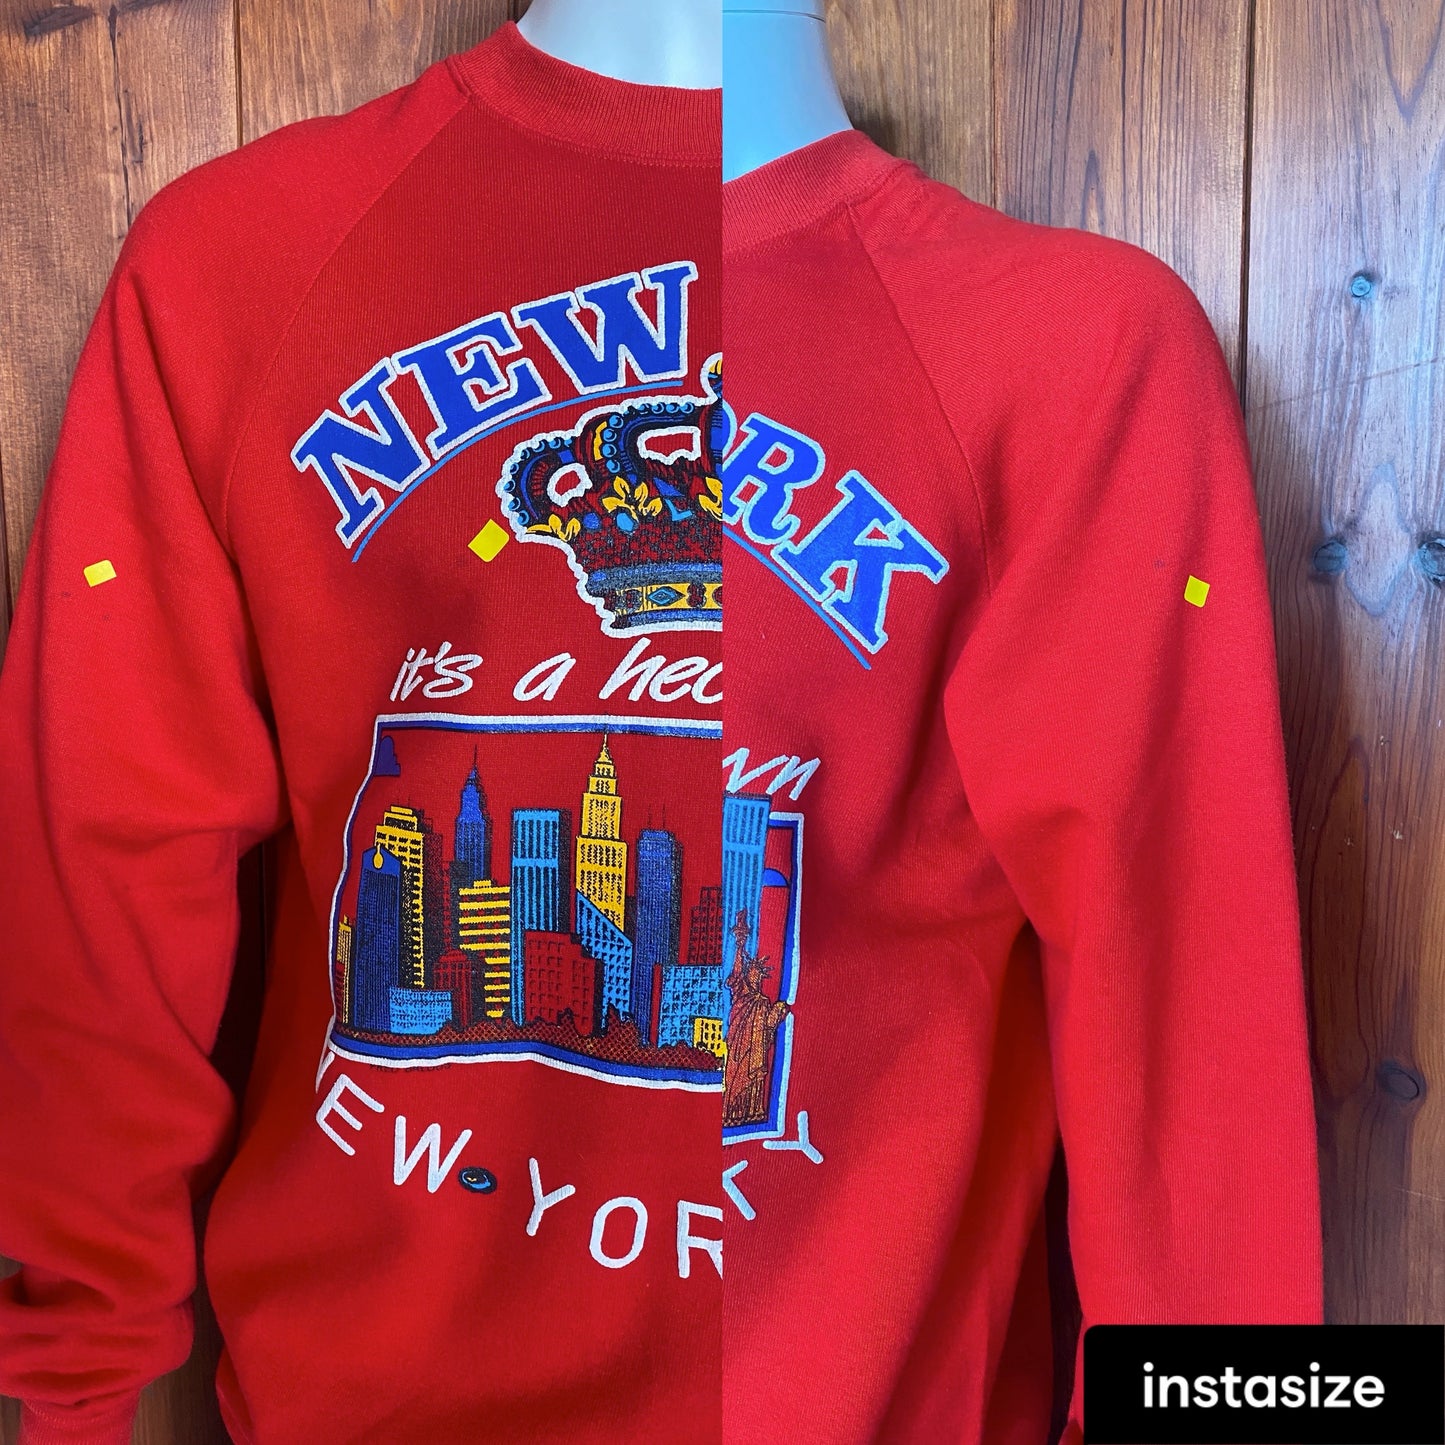 Size XL. New York 80s vintage sweatshirt   made by Jerzees